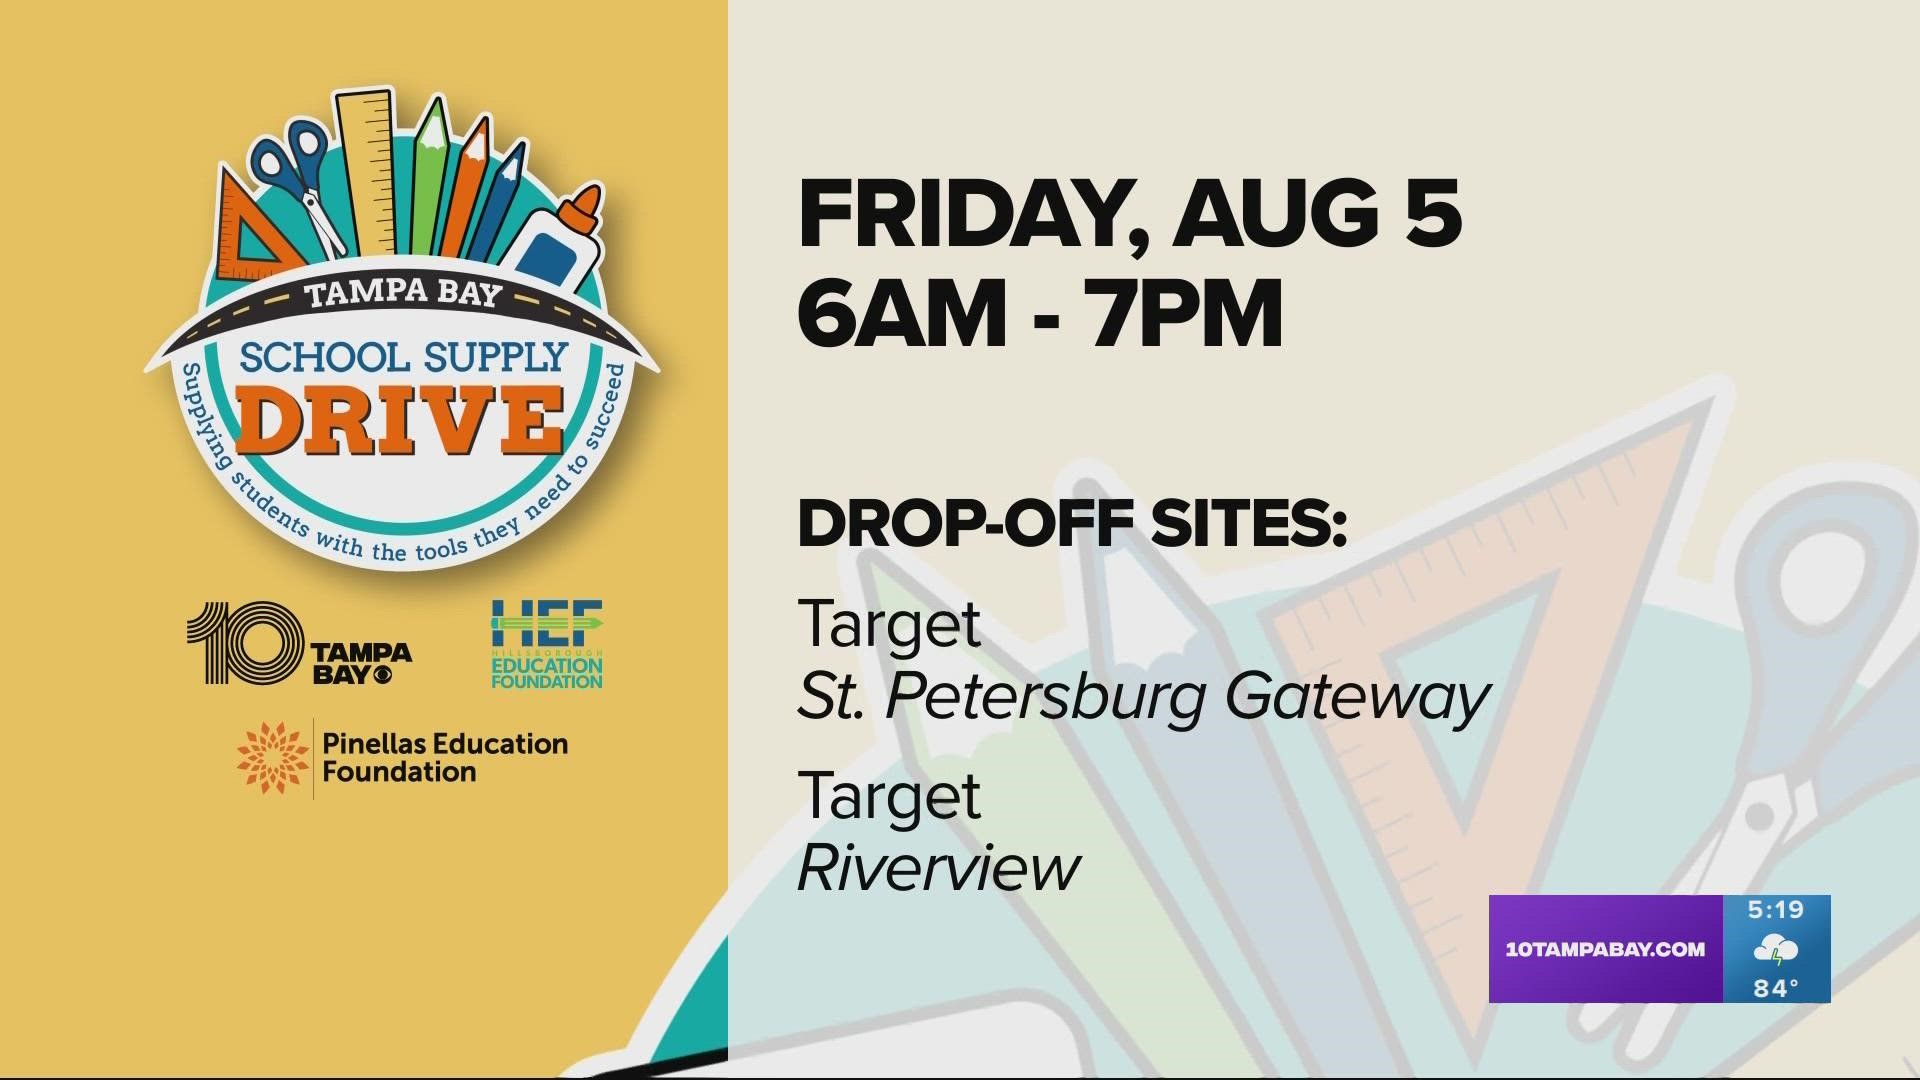 We're accepting donations of vital school supplies on Aug. 5 at the St. Petersburg Gateway Target.